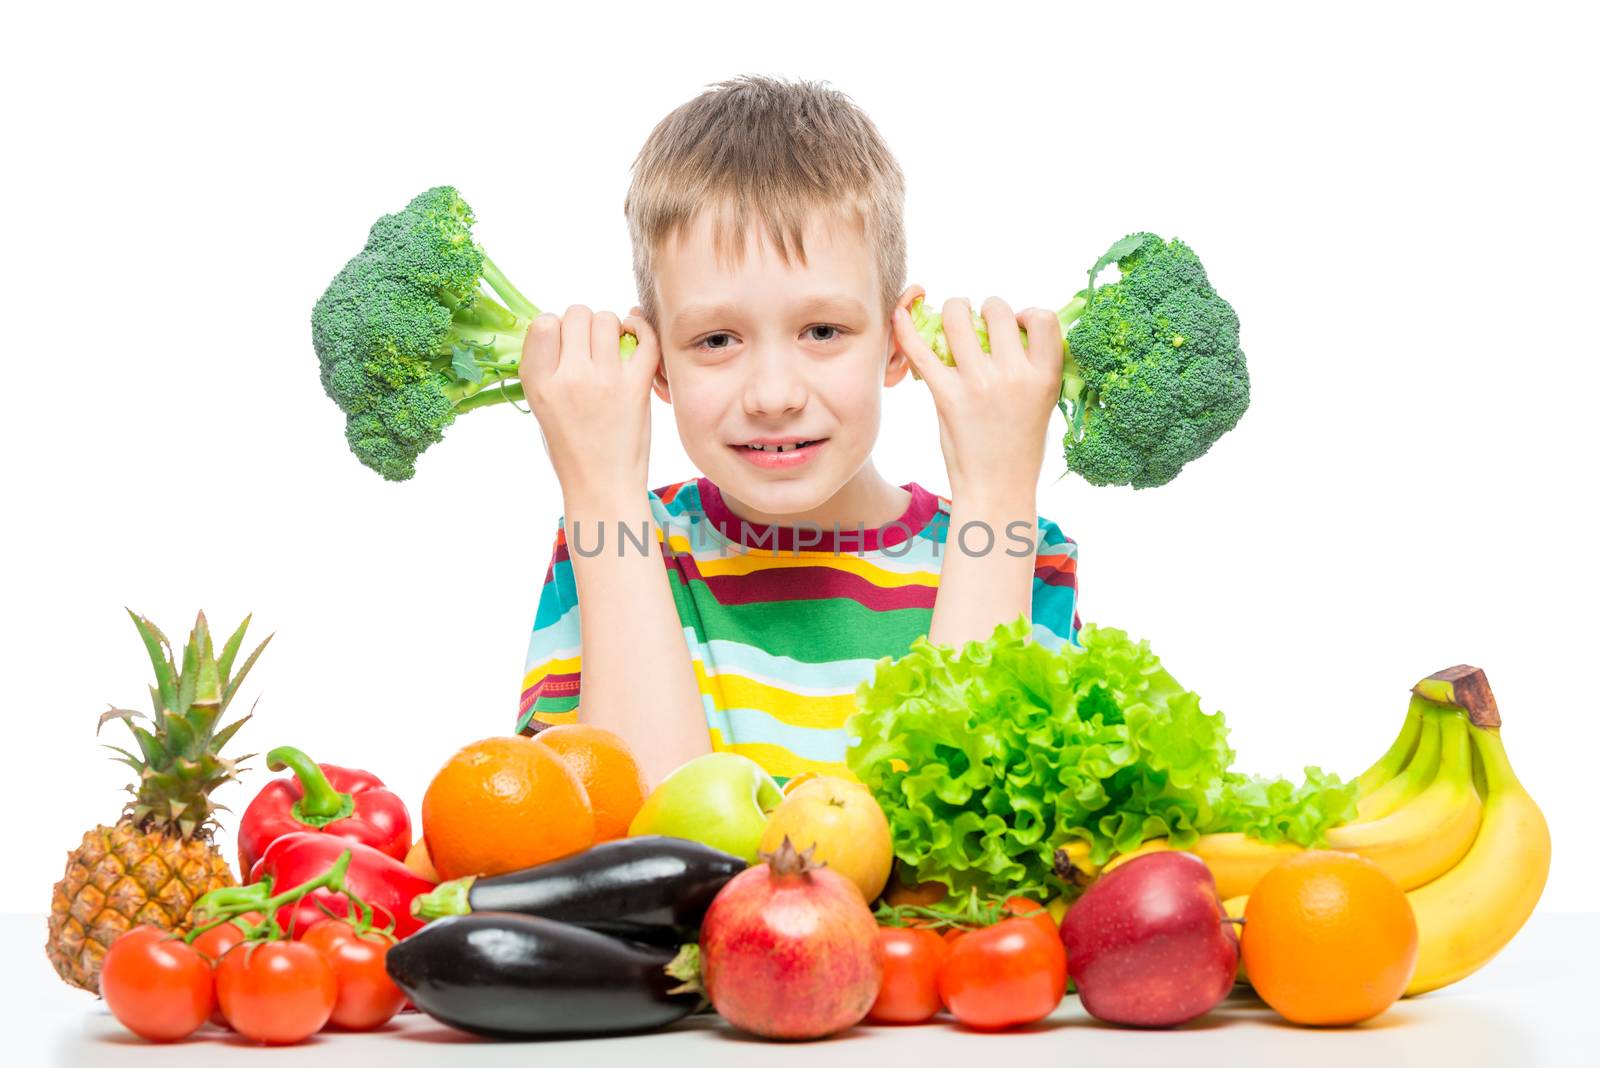 Boy 10 years old with broccoli and a bunch of vegetables and fru by kosmsos111